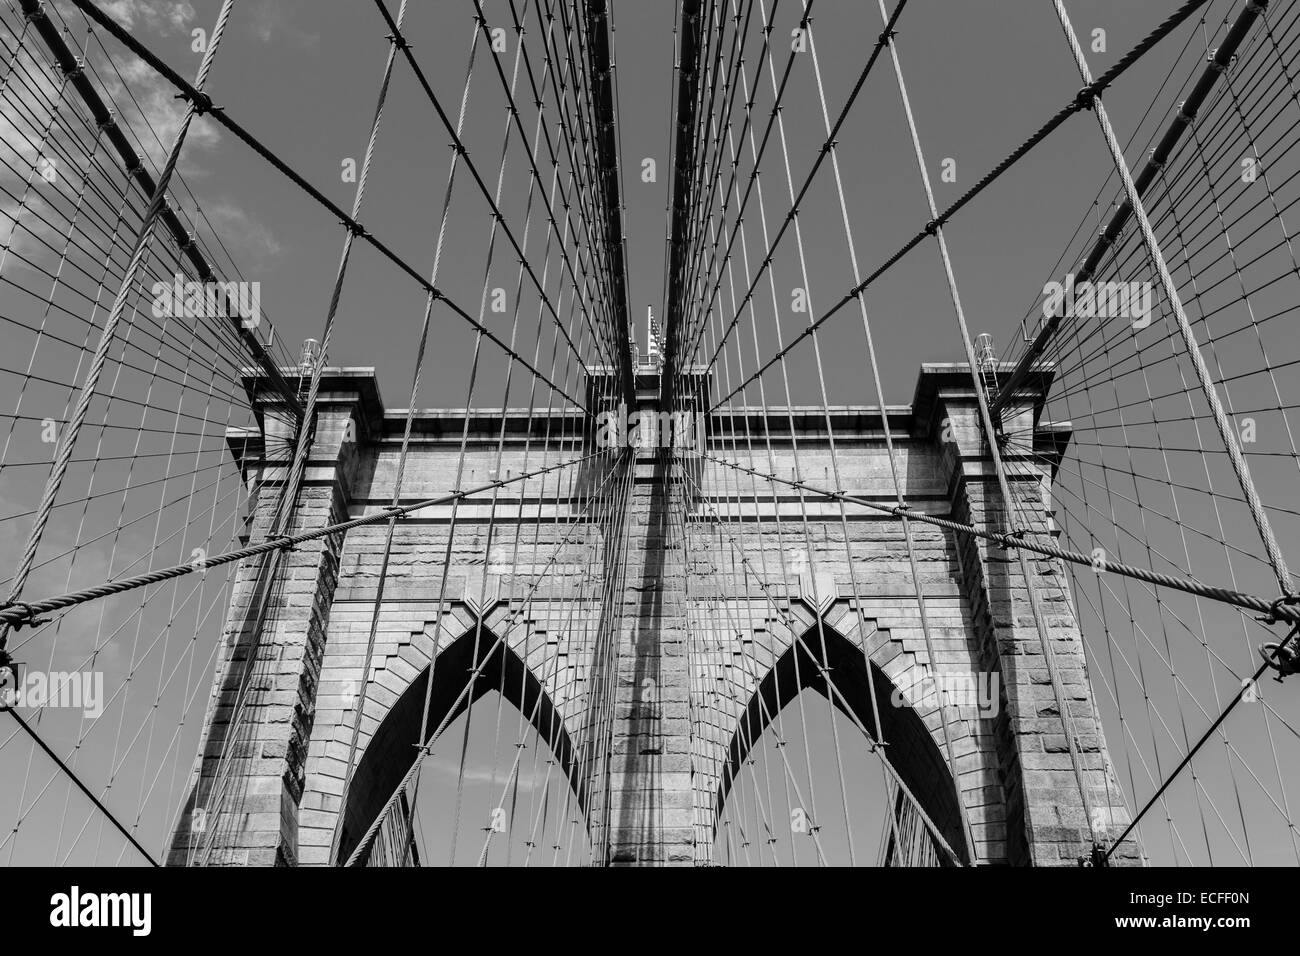 A view of the arches of Brooklyn Bridge in NYC in black and white Stock Photo